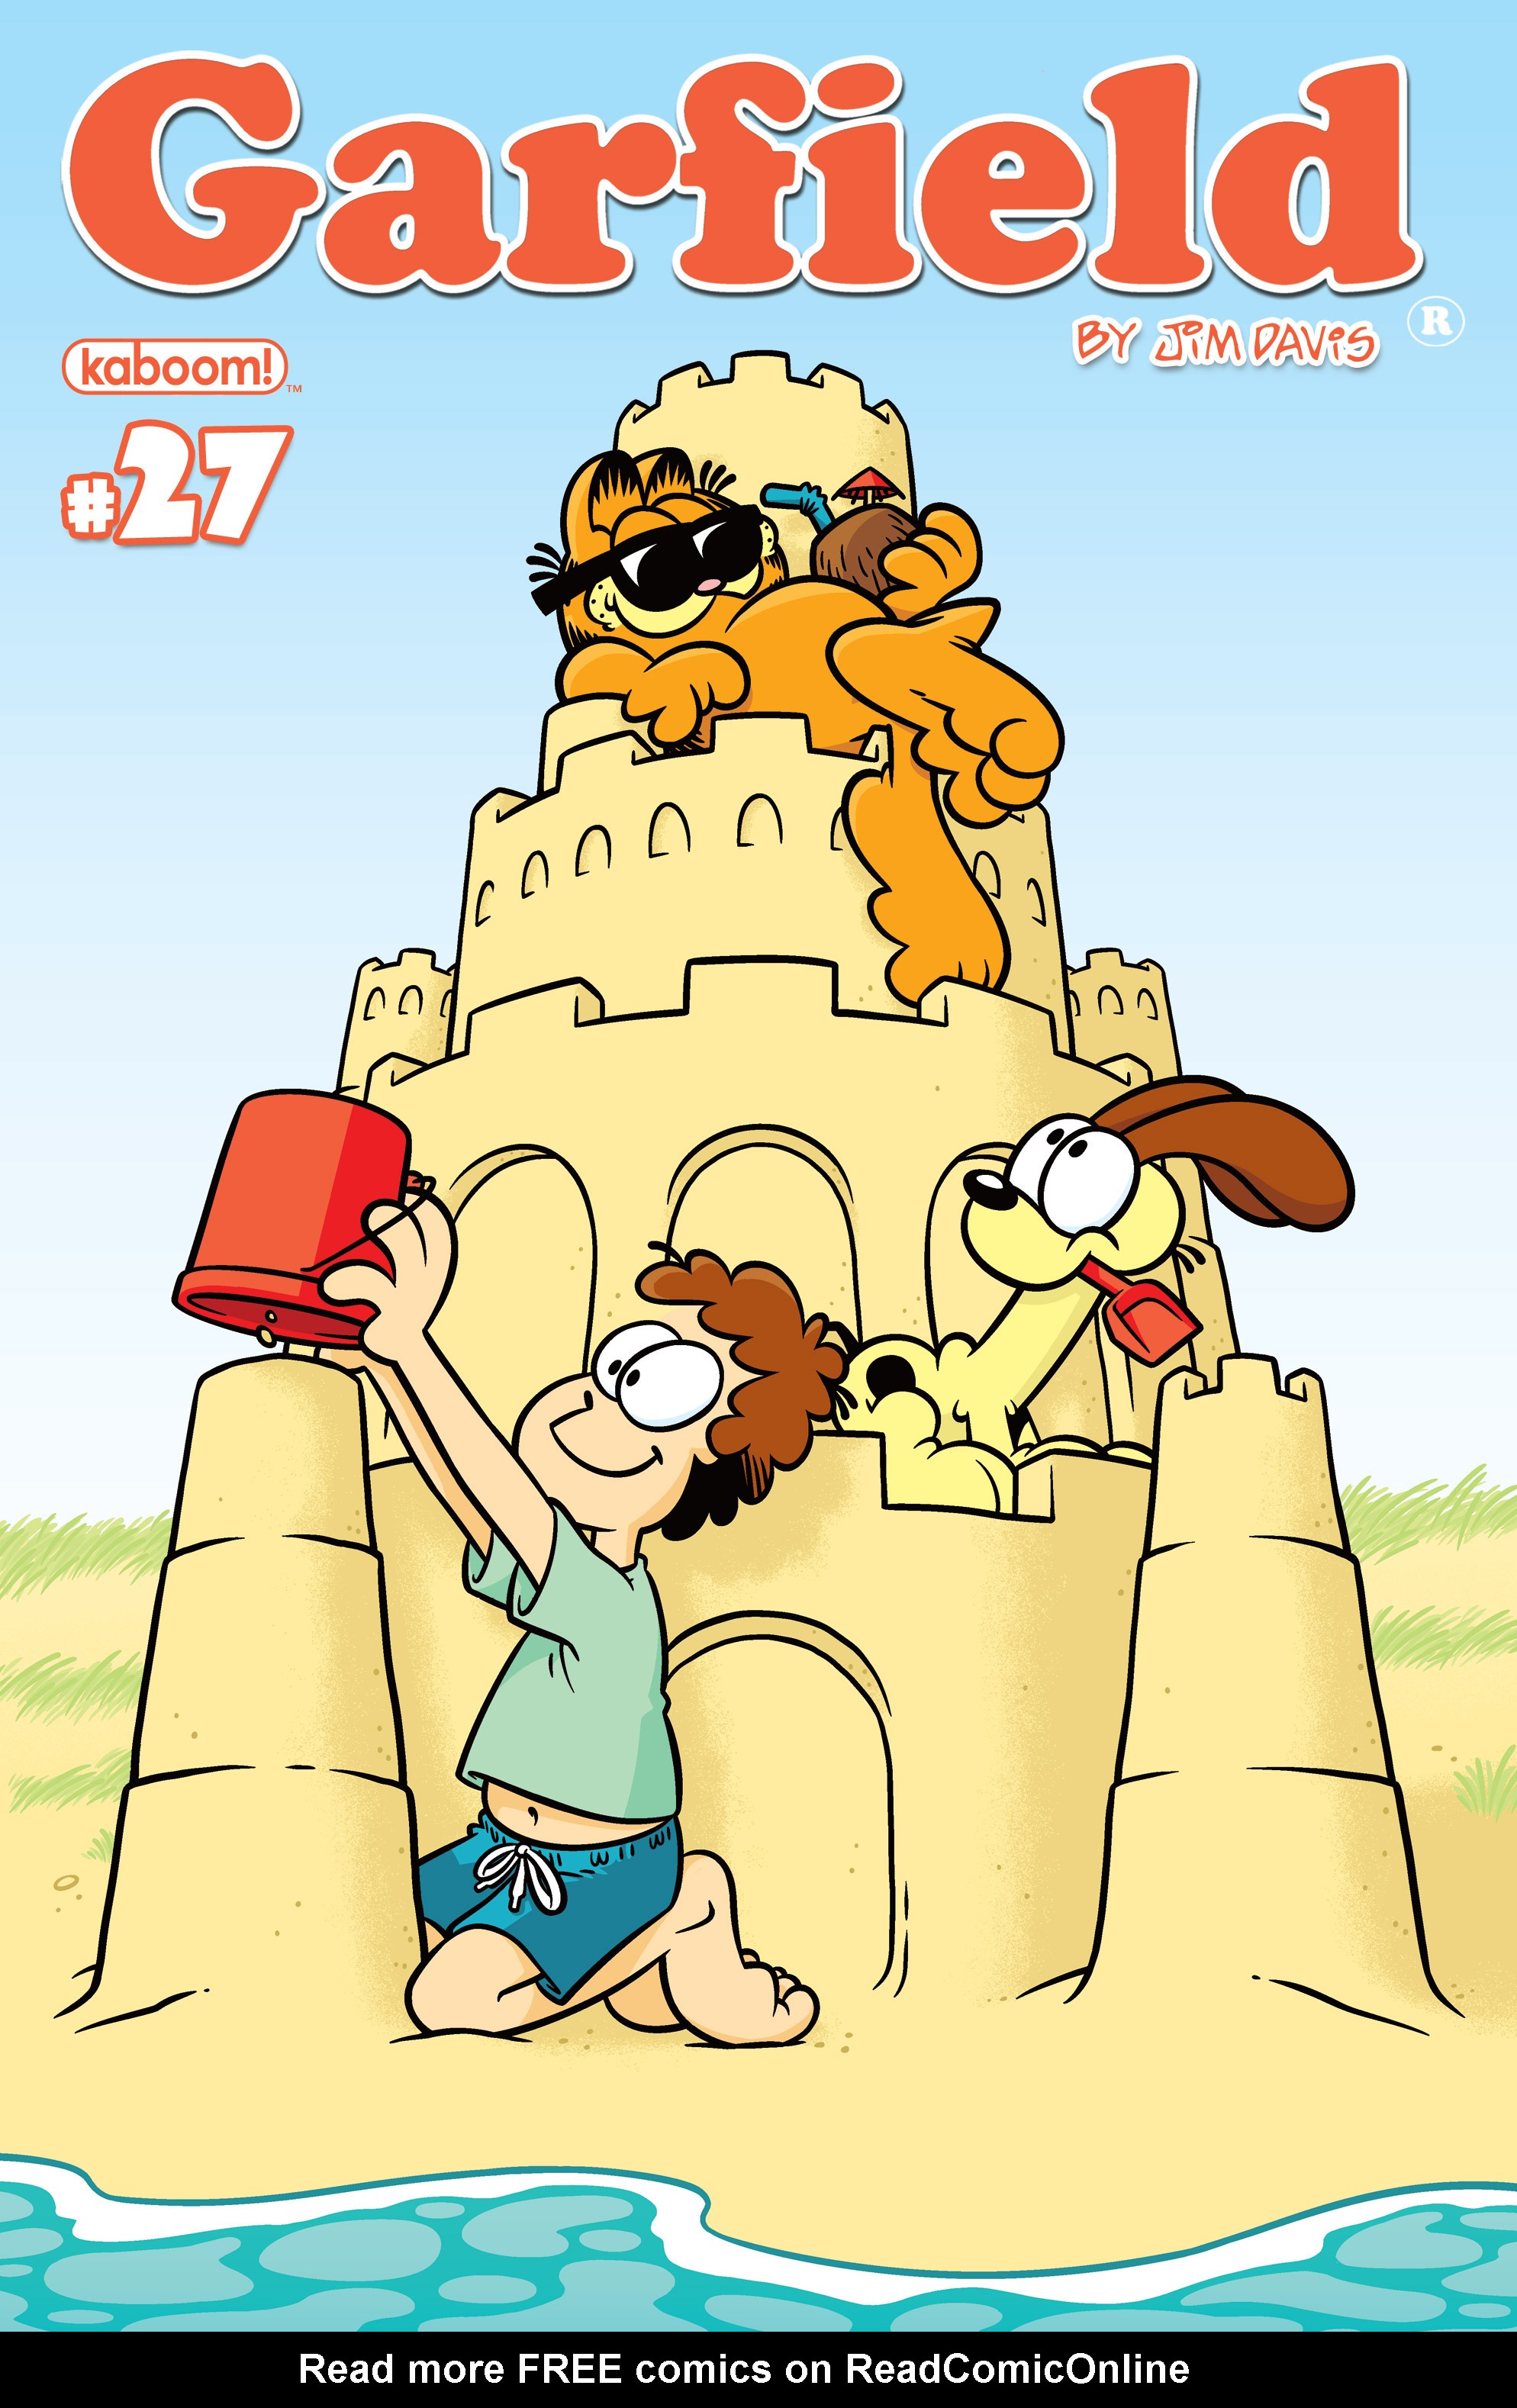 Garfield Issue 27 | Read Garfield Issue 27 comic online in high quality.  Read Full Comic online for free - Read comics online in high quality  .|viewcomiconline.com